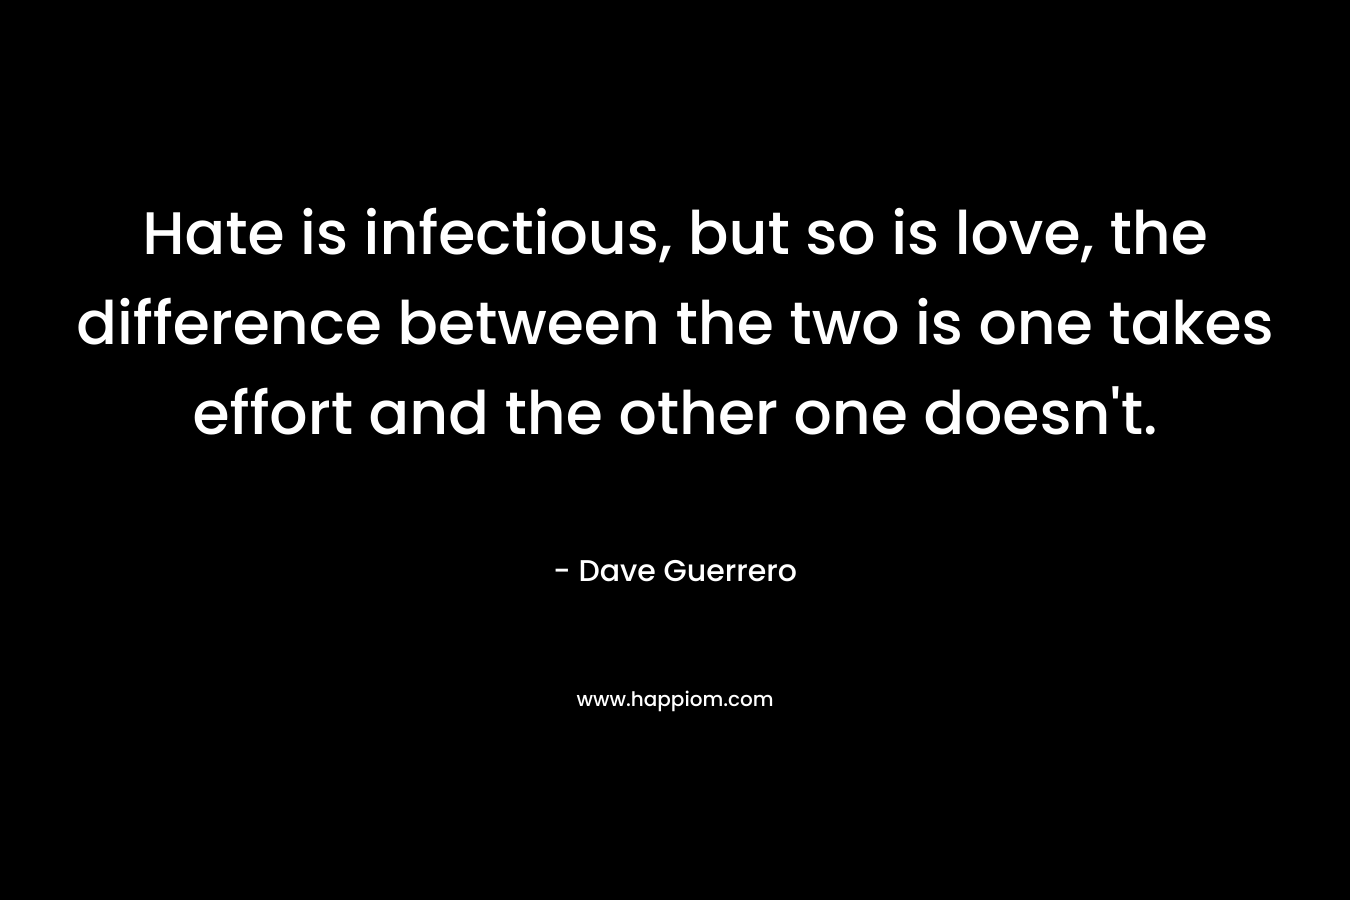 Hate is infectious, but so is love, the difference between the two is one takes effort and the other one doesn't.